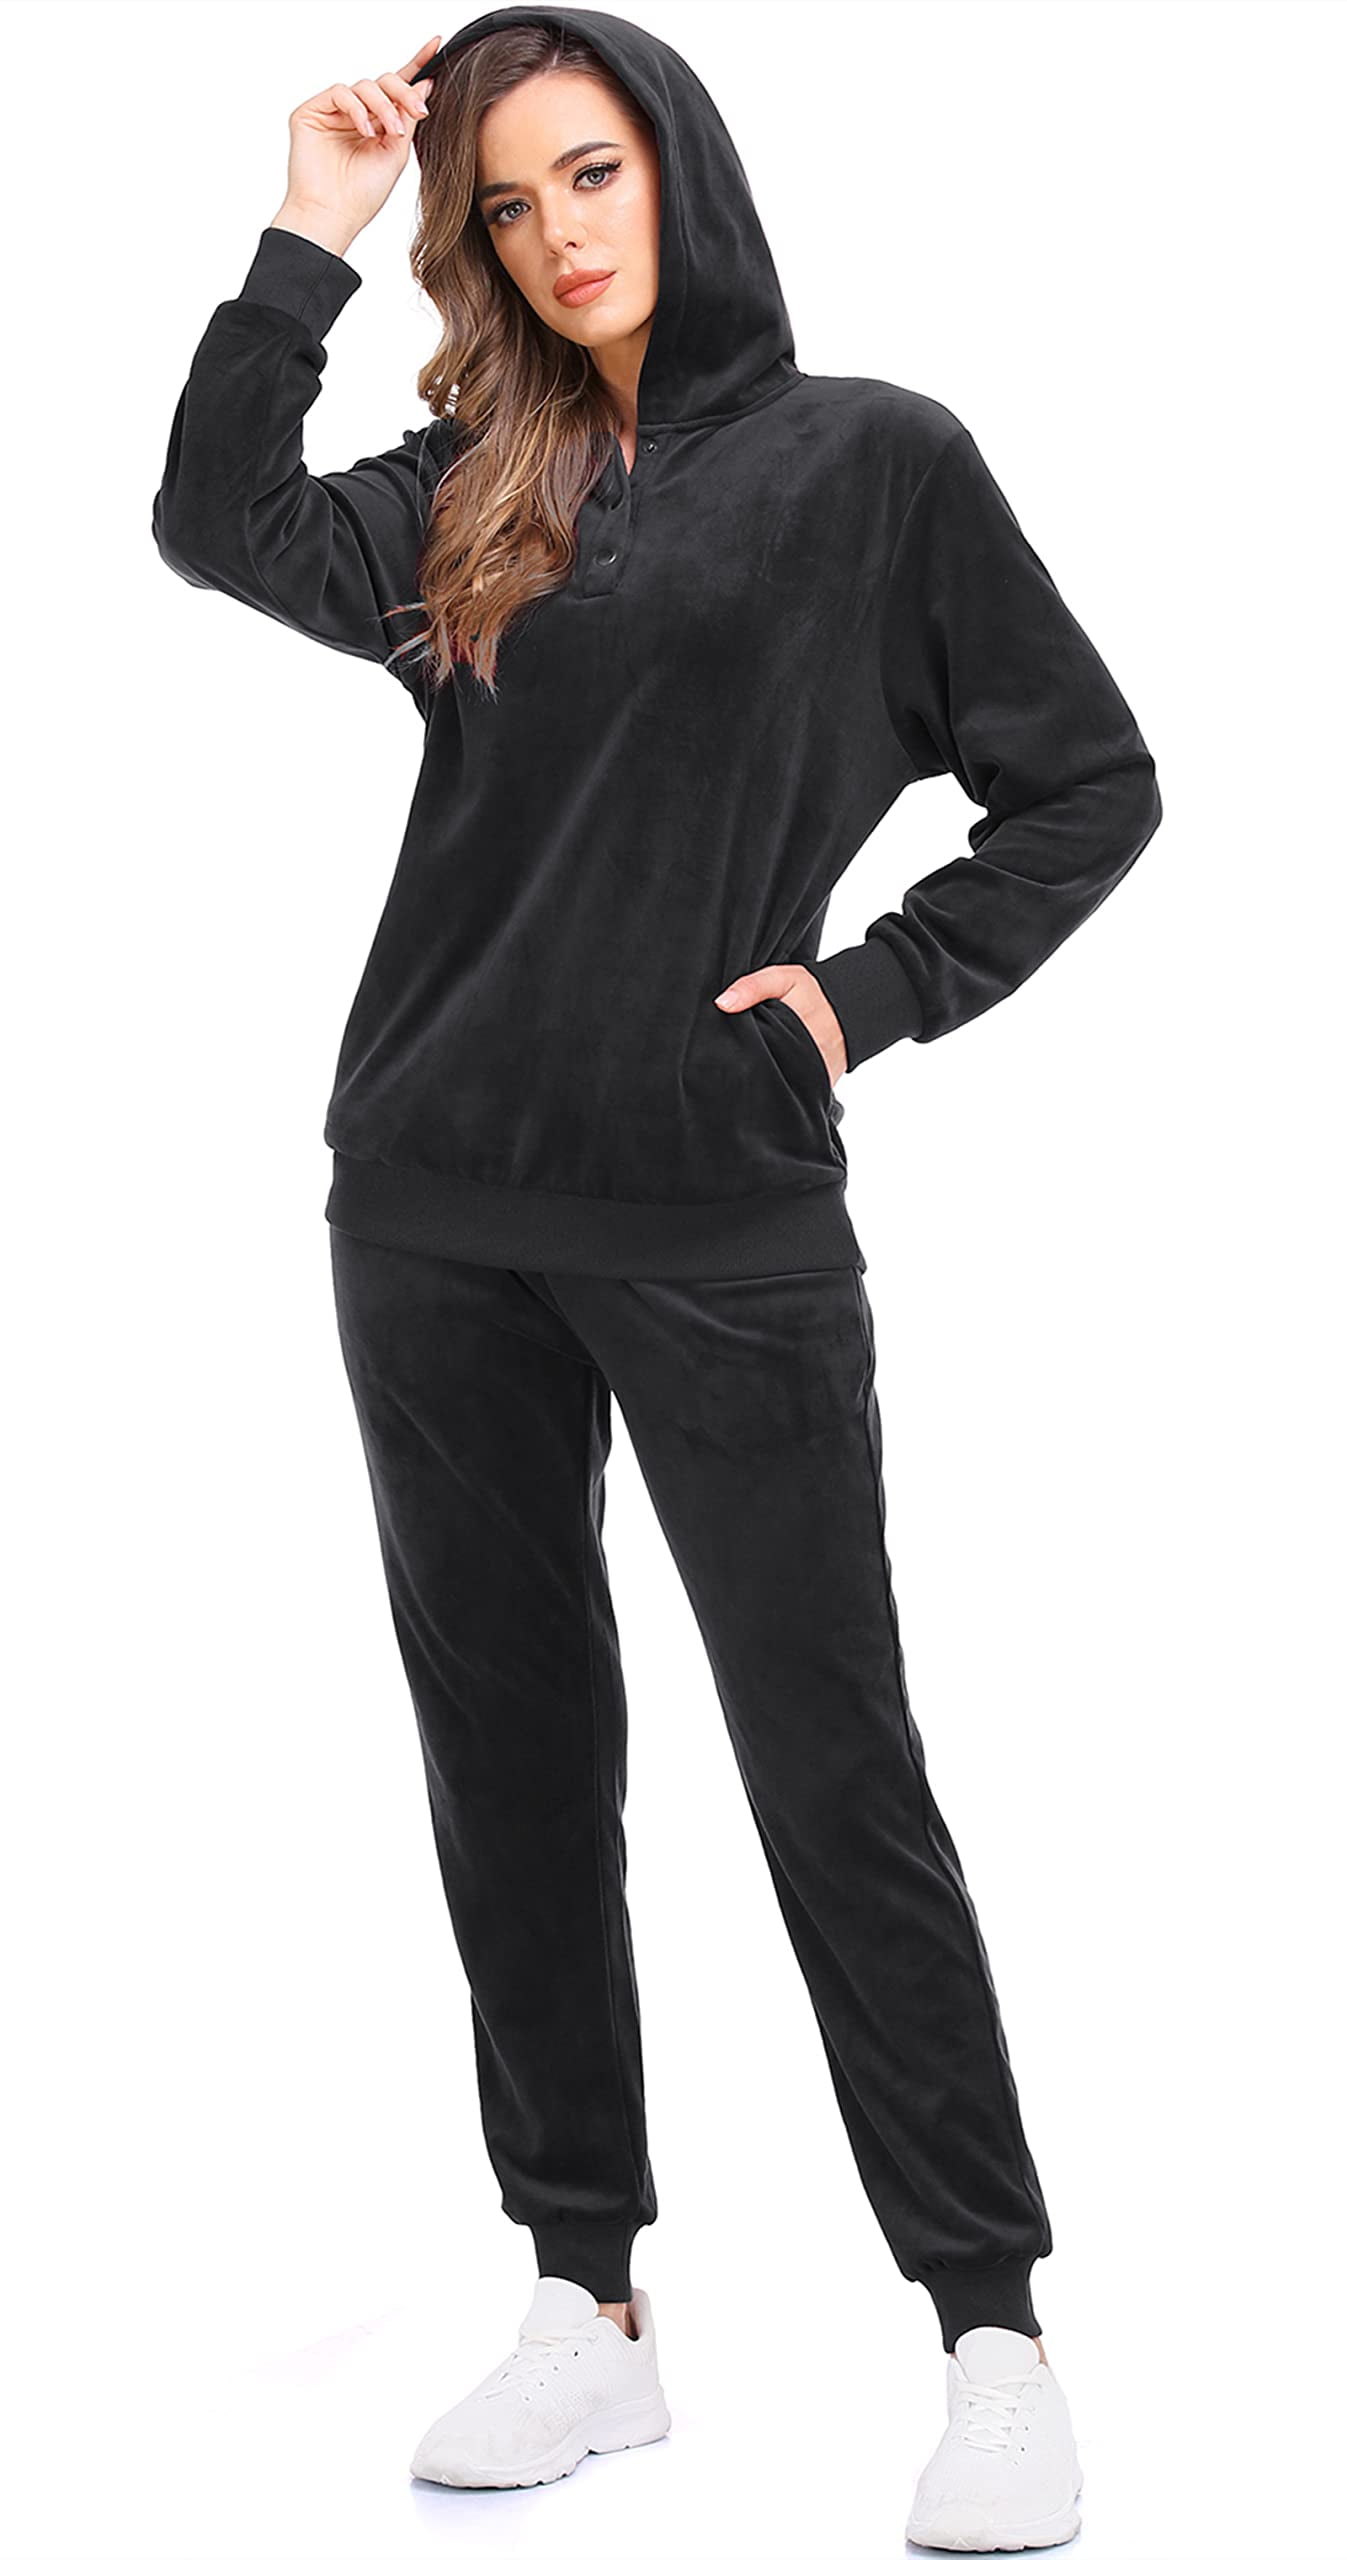 SWISSWELL Velour Track Suits for Women Set Sweatsuits 2 Piece Velour ...